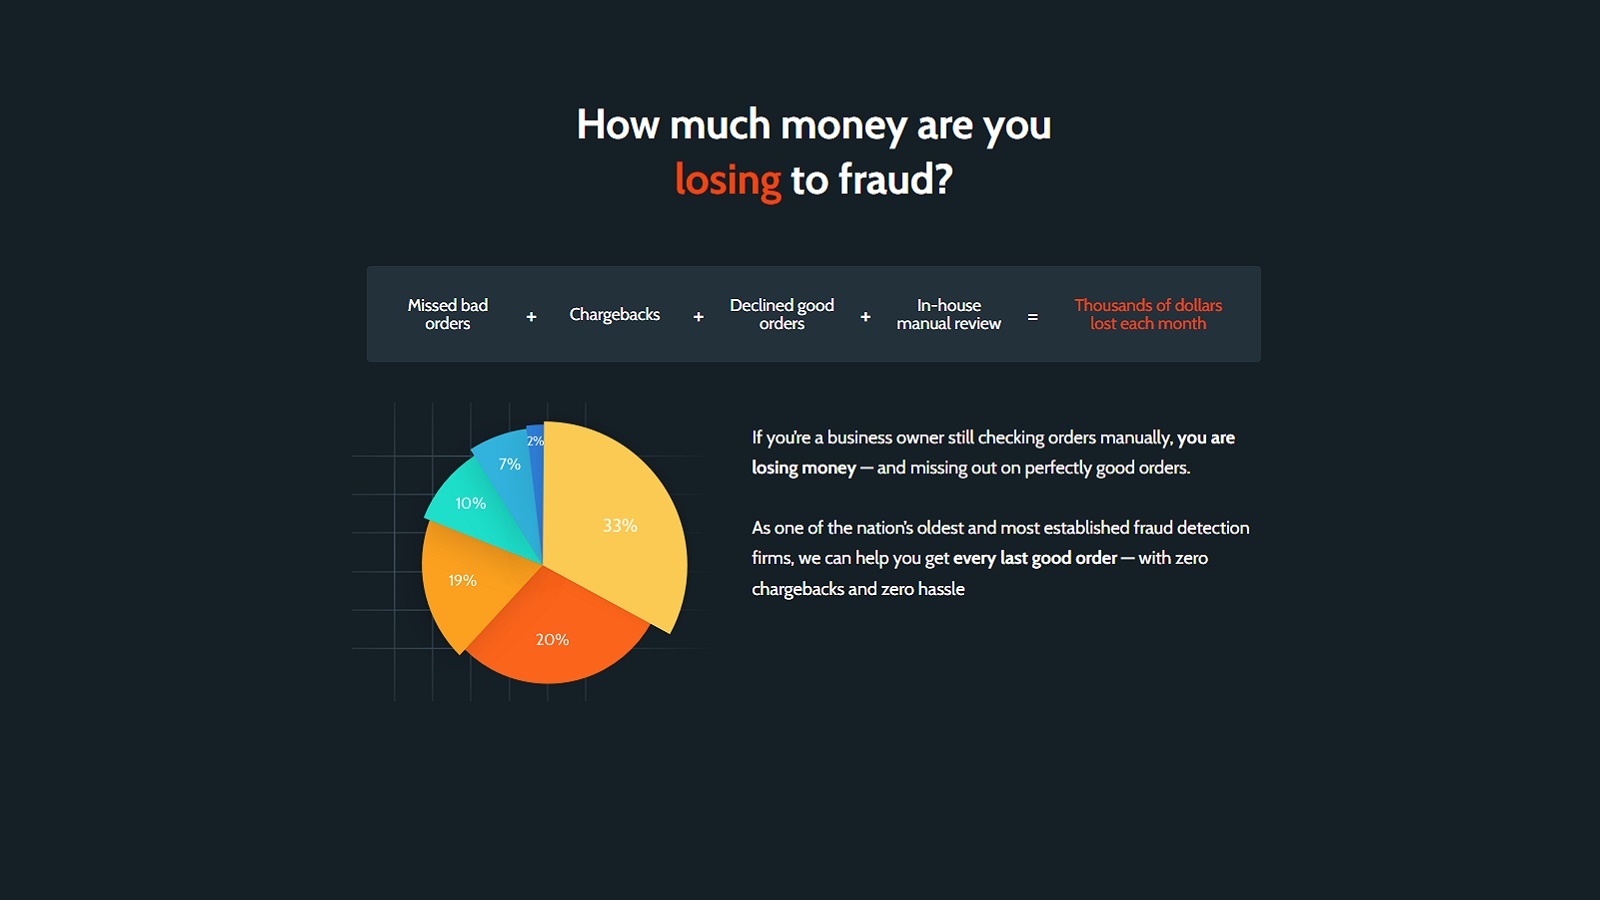 How much money are you losing for fraud?